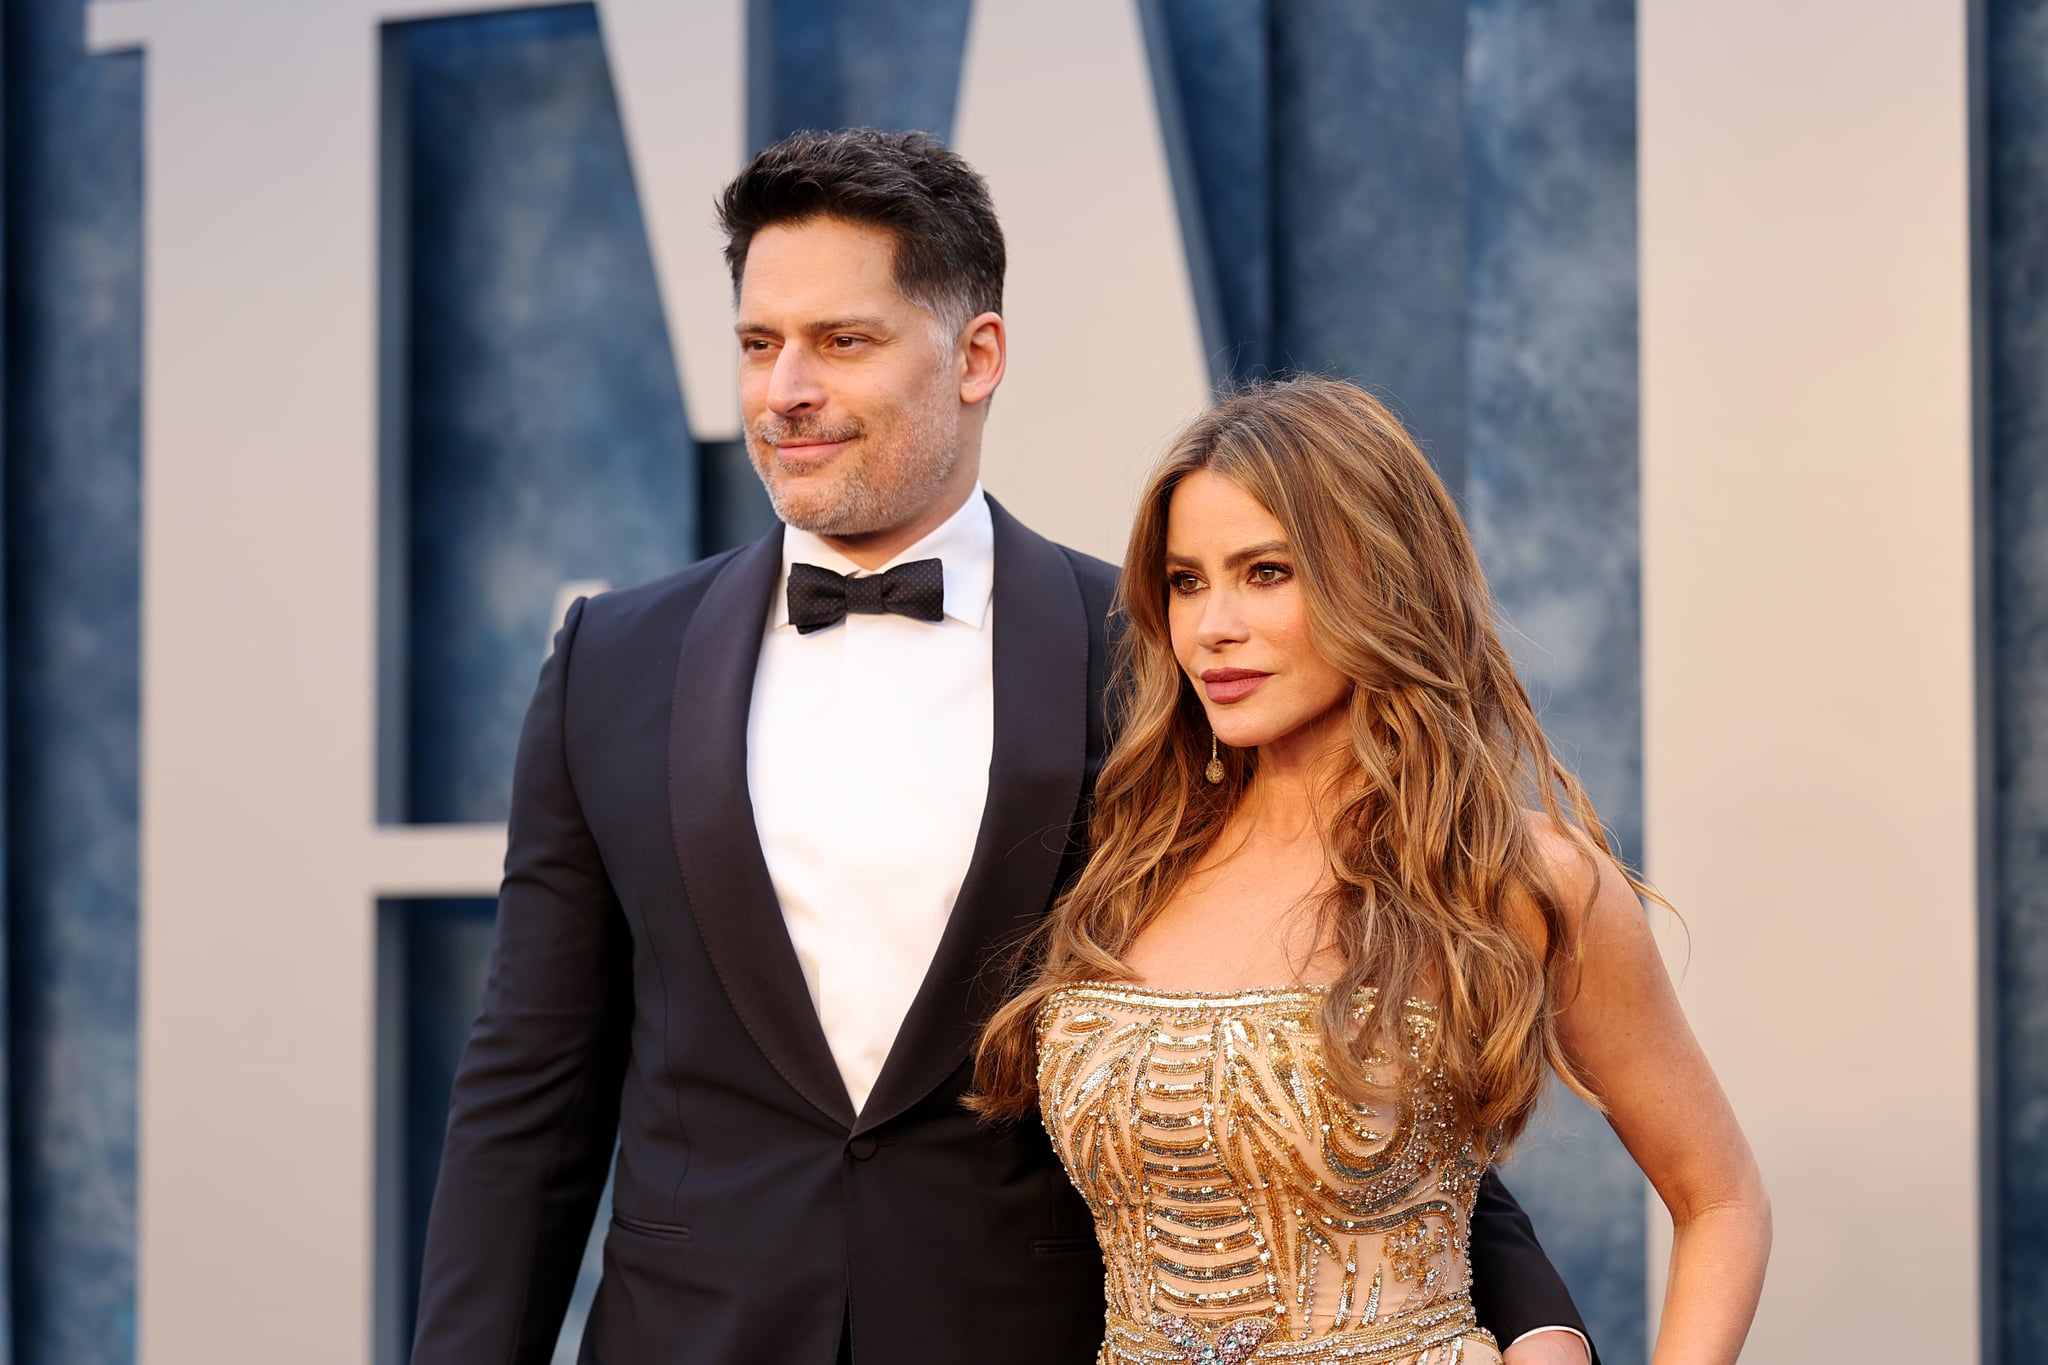 BEVERLY HILLS, CALIFORNIA - MARCH 12: Joe Manganiello and Sofía Vergara attend the 2023 Vanity Fair Oscar Party Hosted By Radhika Jones at Wallis Annenberg Centre for the Performing Arts on March 12, 2023 in Beverly Hills, California. (Photo by Cindy Ord/VF23/Getty Images for Vanity Fair)